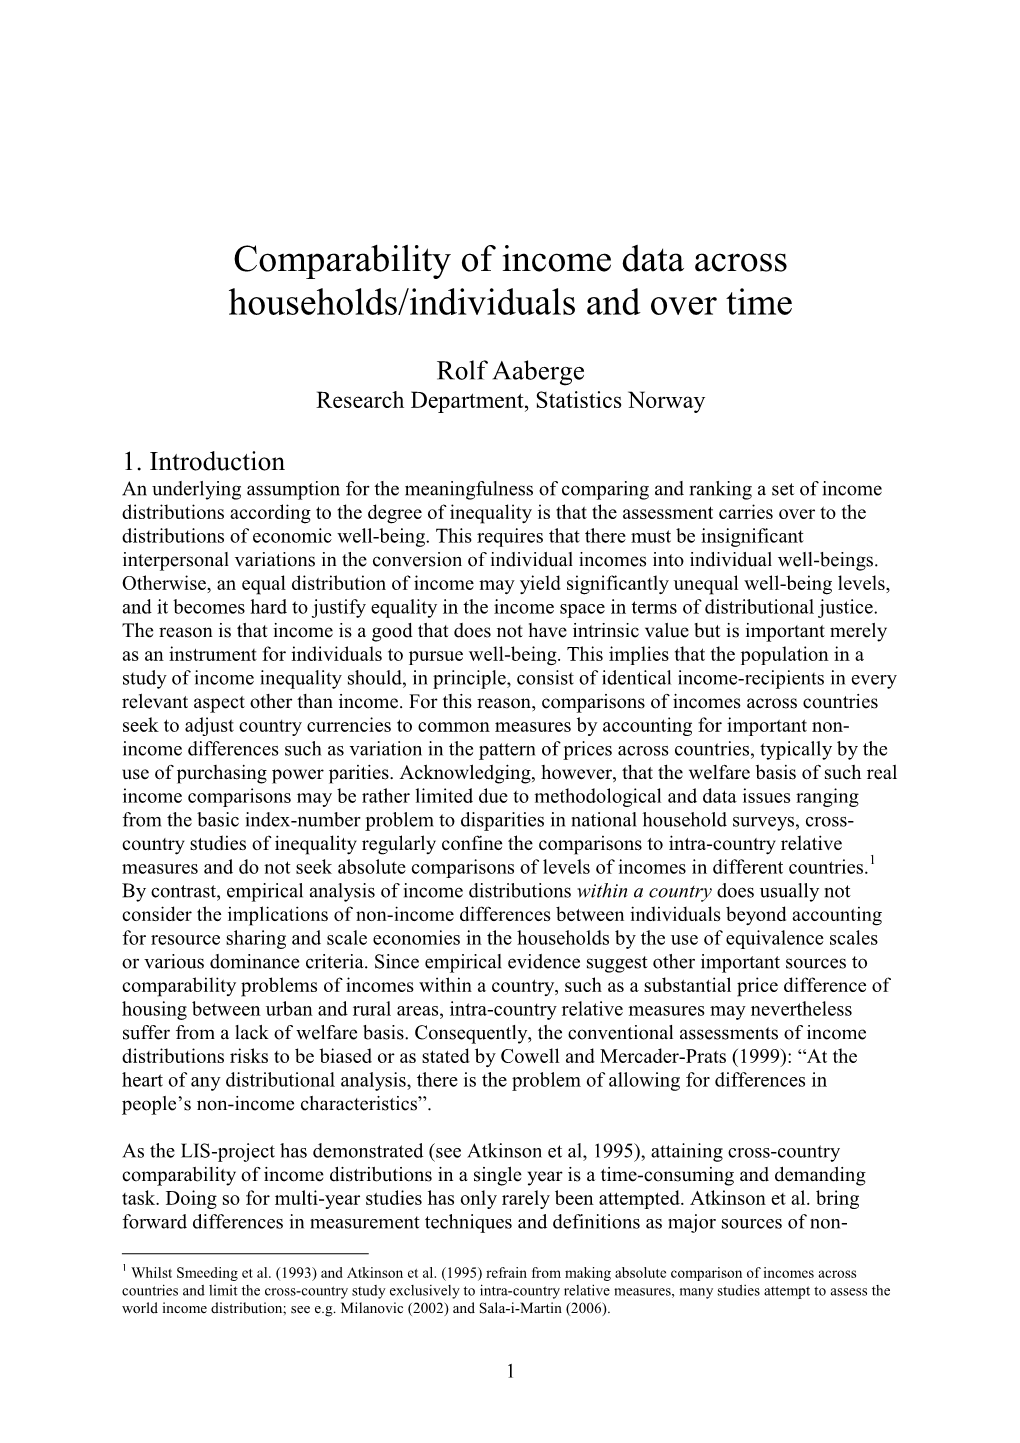 Comparability of Income Data Across Households/Individuals and Over Time